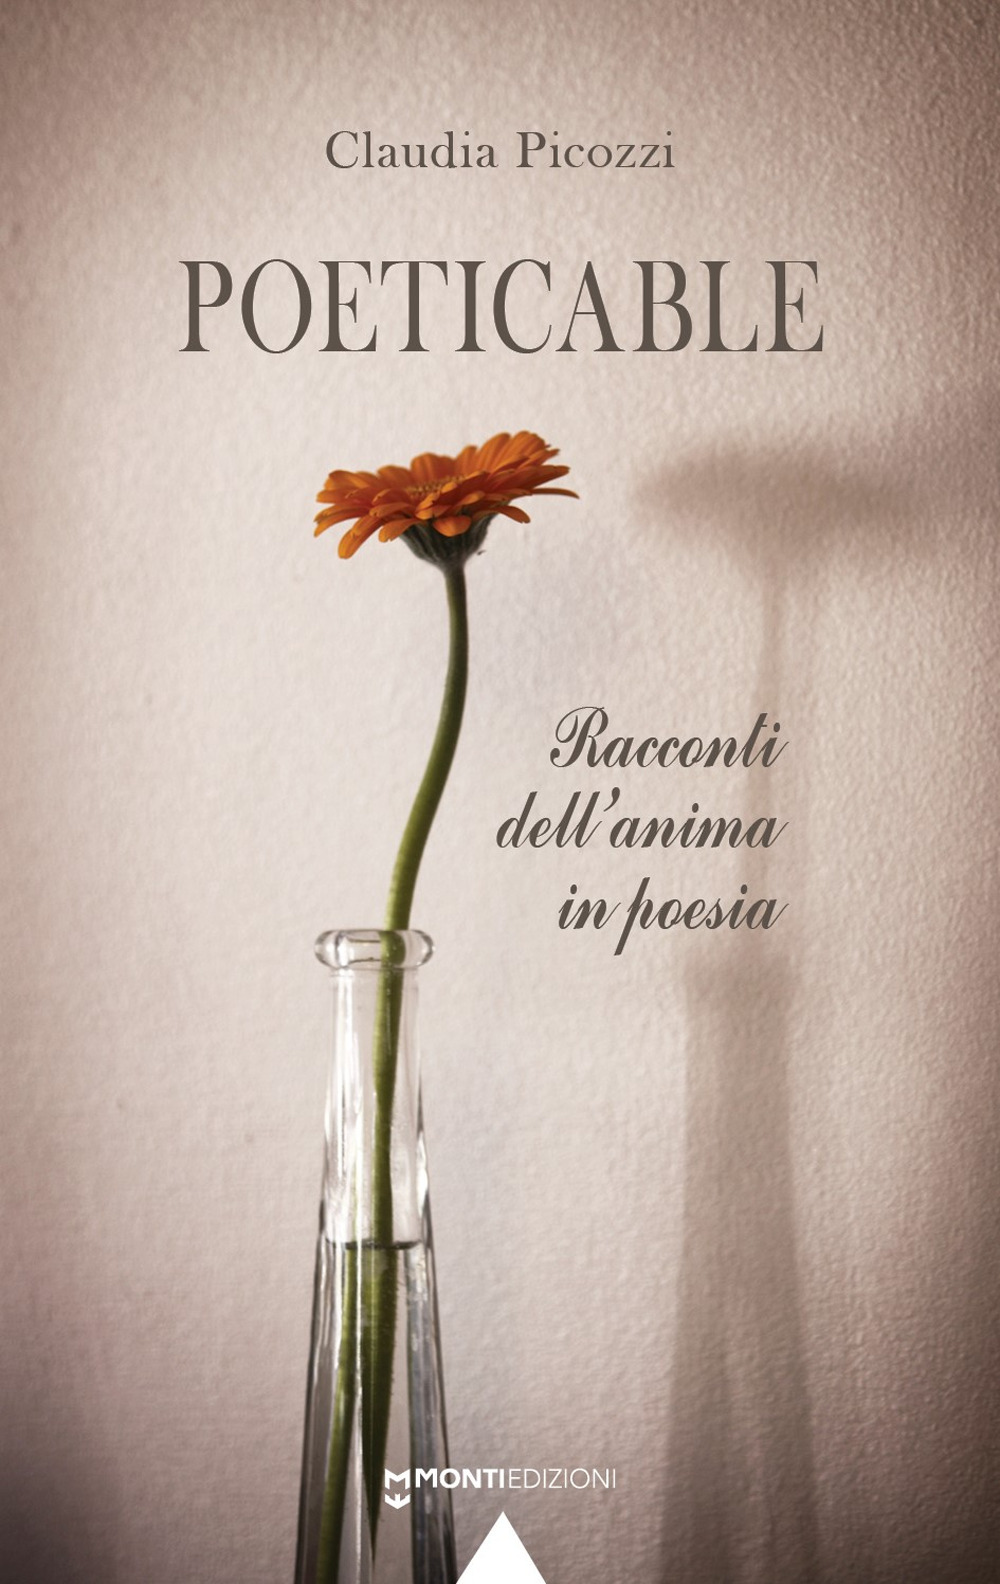 Poeticable. Racconti dell'anima in poesia